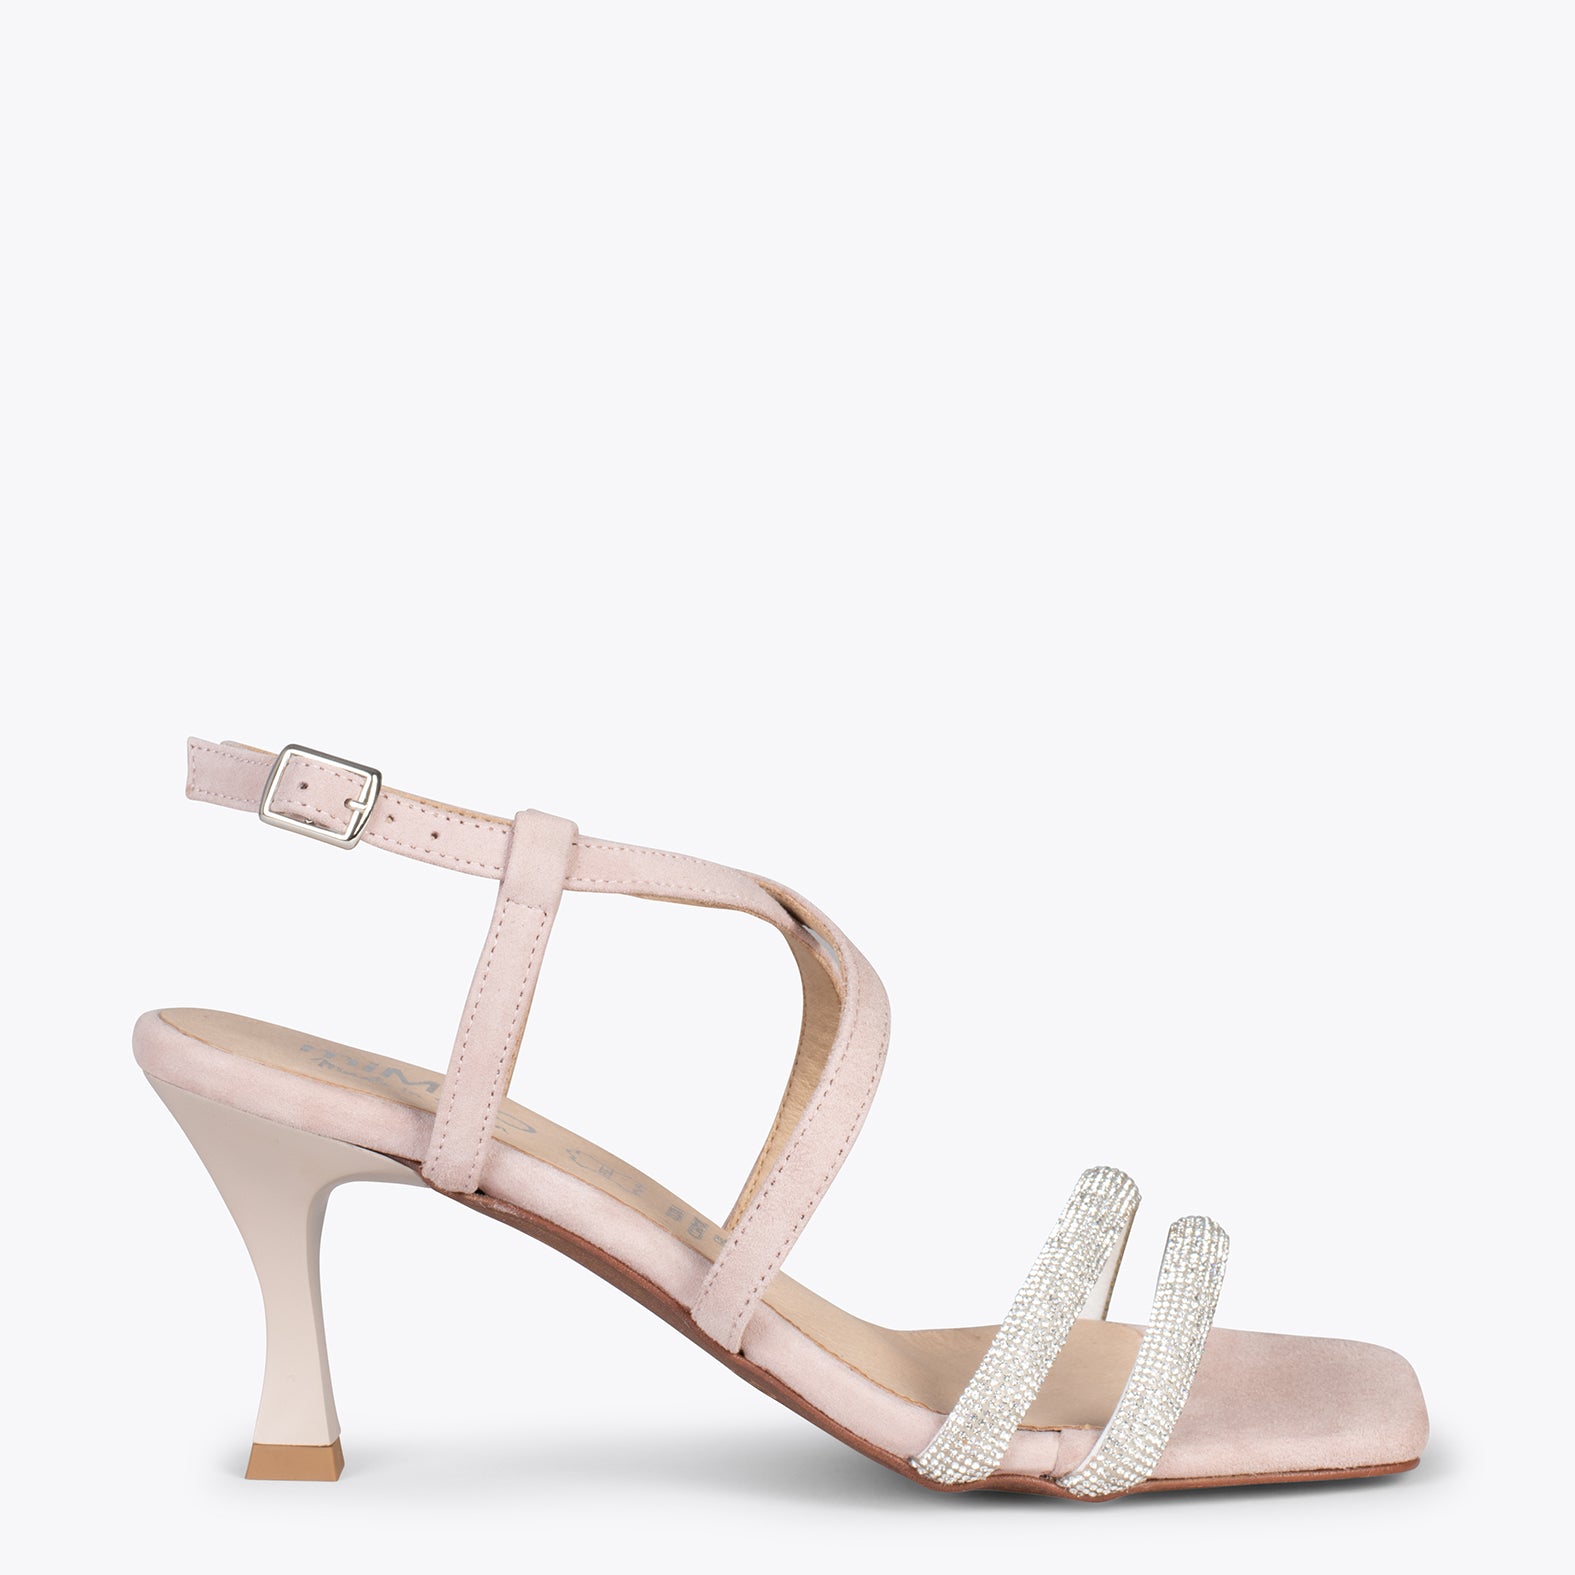 SHINY – NUDE high heel sandals with strass straps